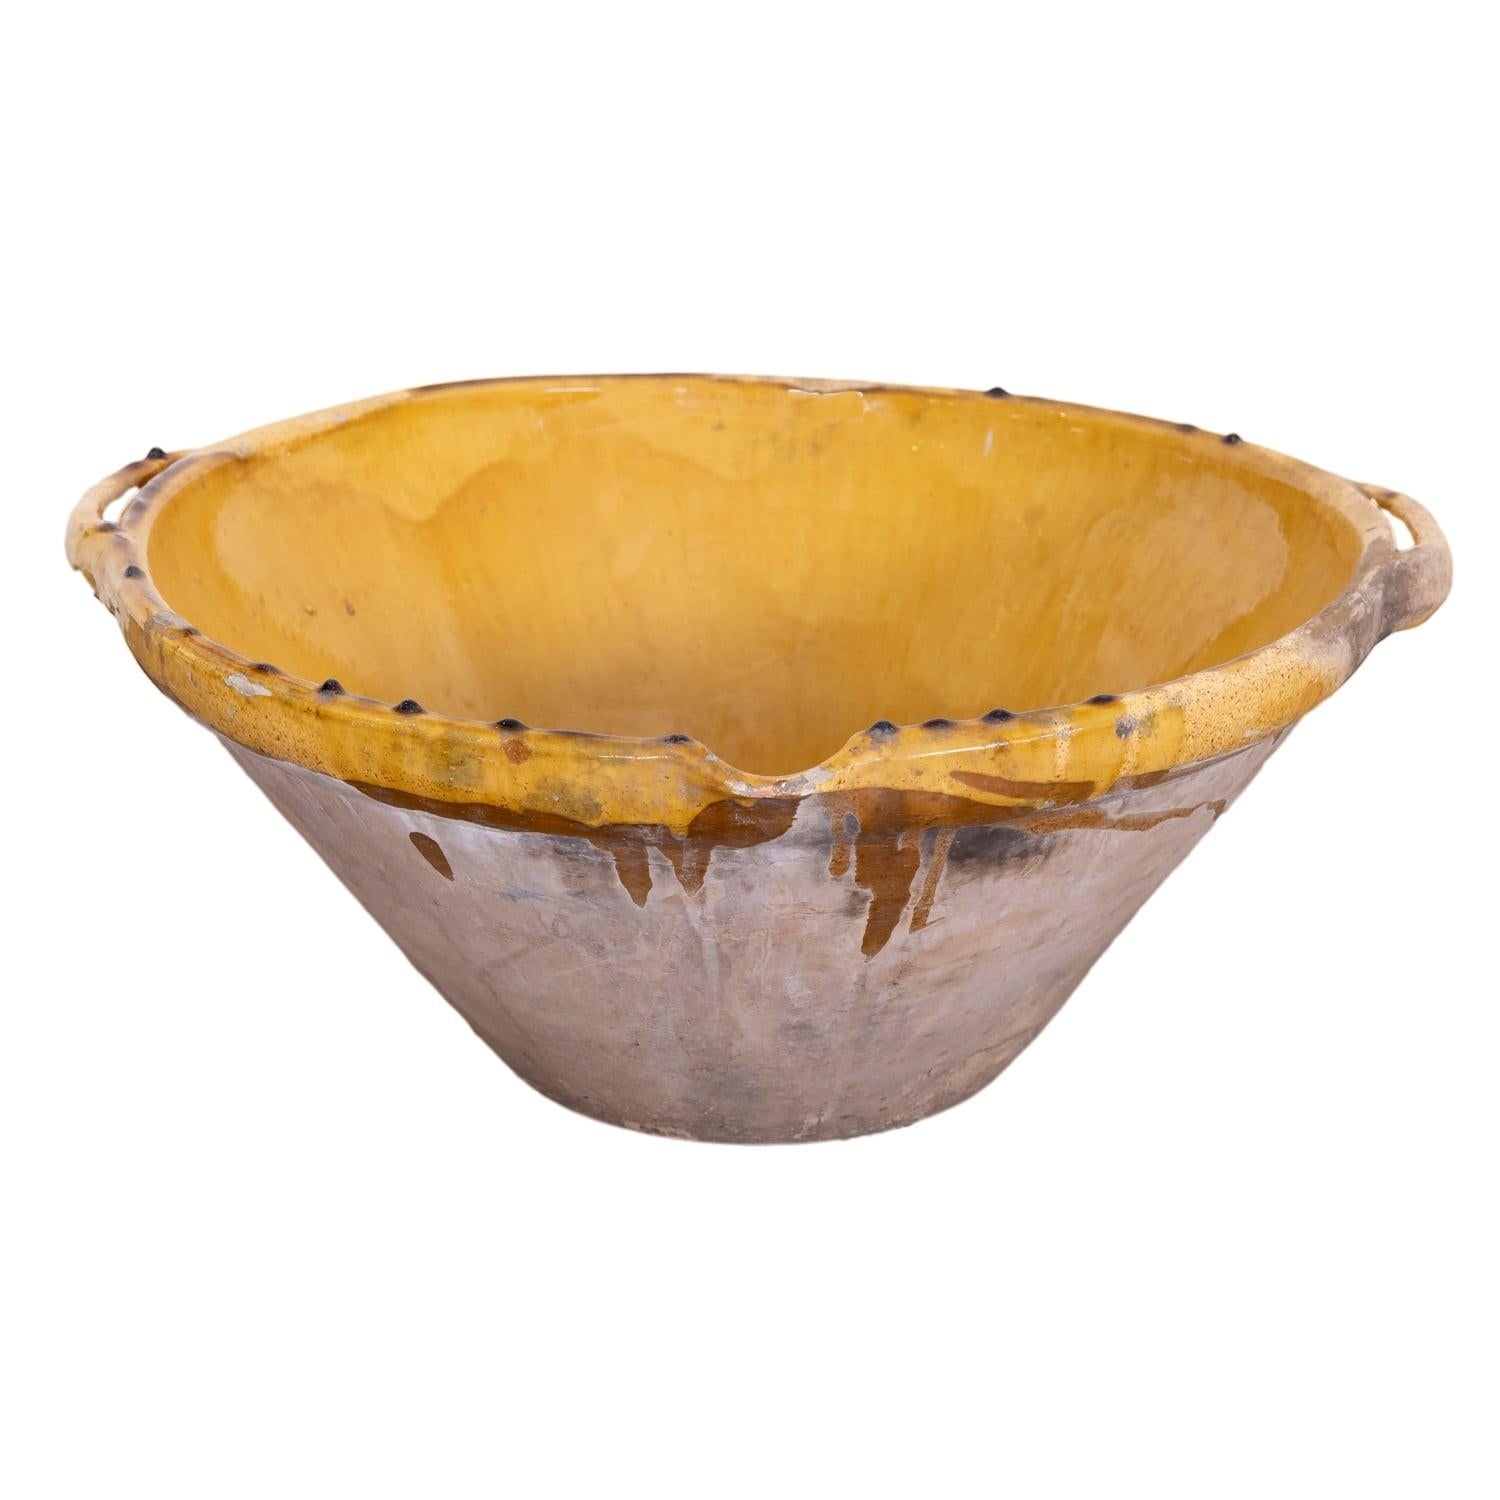 Large Antique 19th Century French Terracotta Tian Bowl with Mustard Yellow Glaze